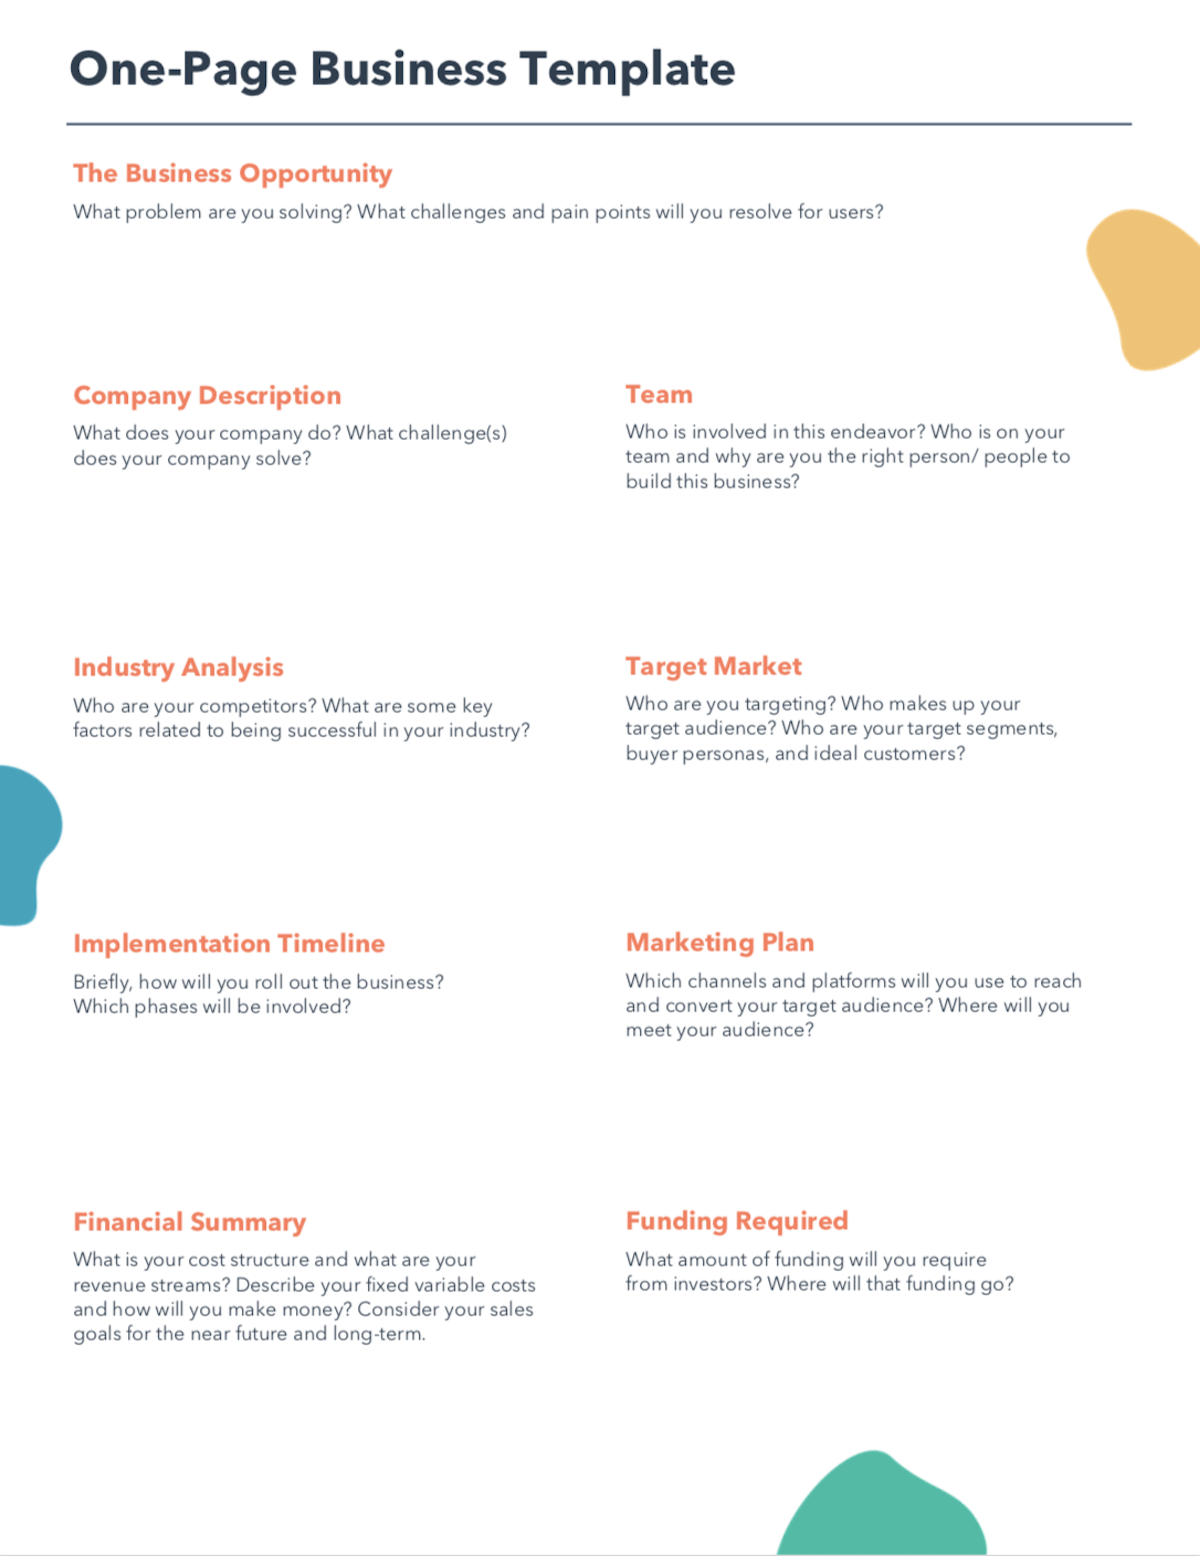 Free One Page Business Plan Template for PDF  Word  HubSpot With Regard To Business Plan Template For App Development